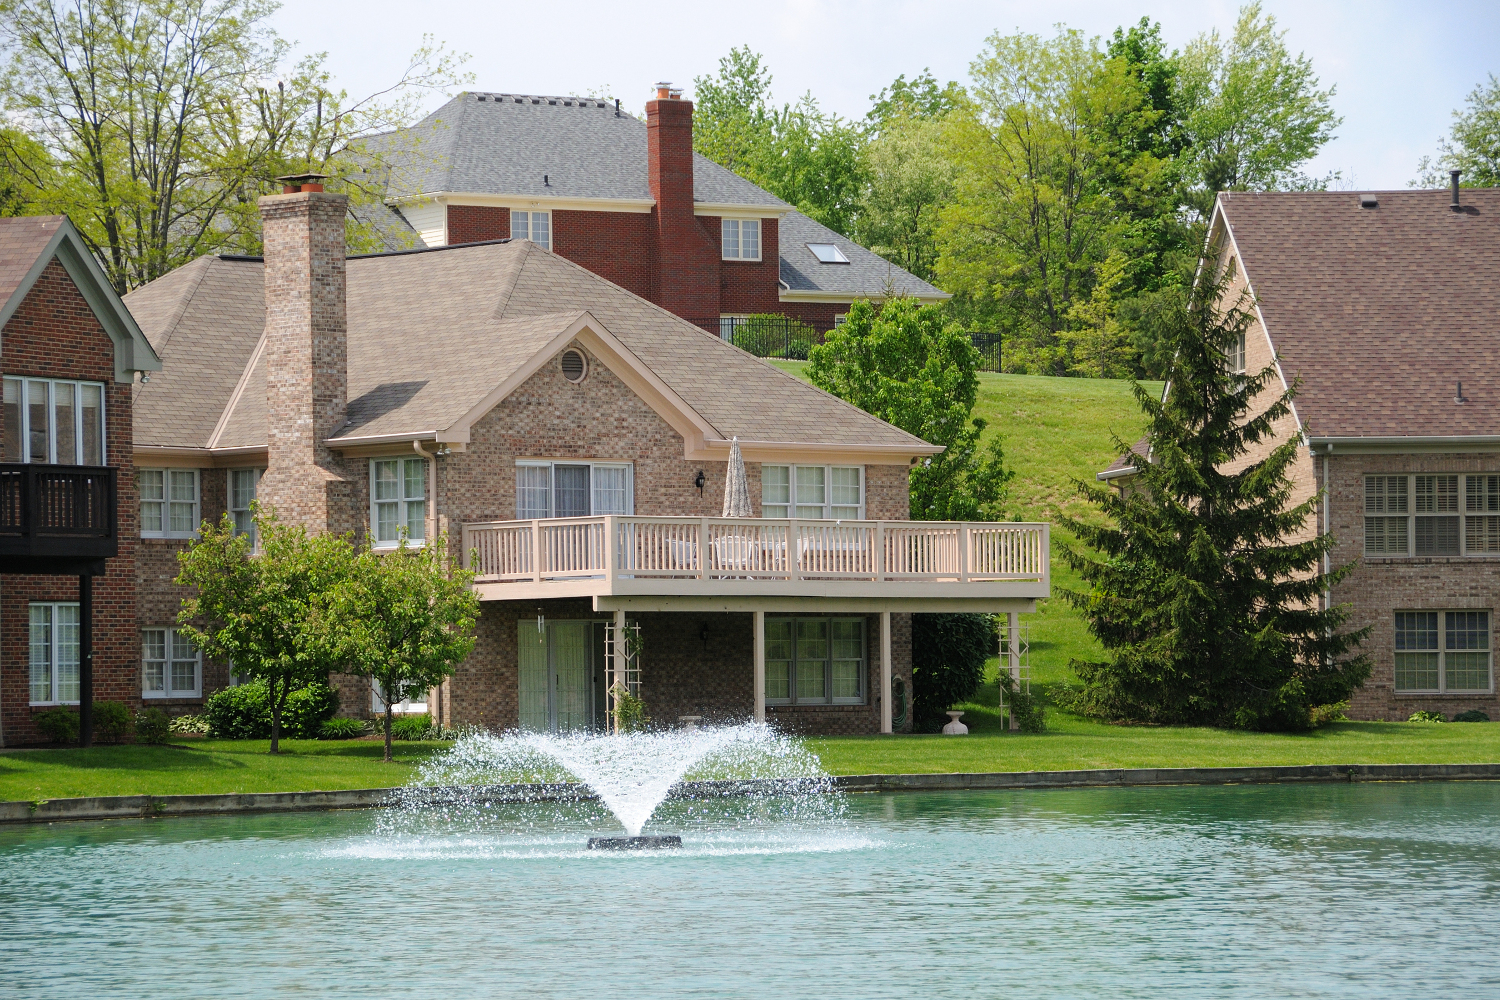 One of Otterbine's Aerating Fountains in a residential area